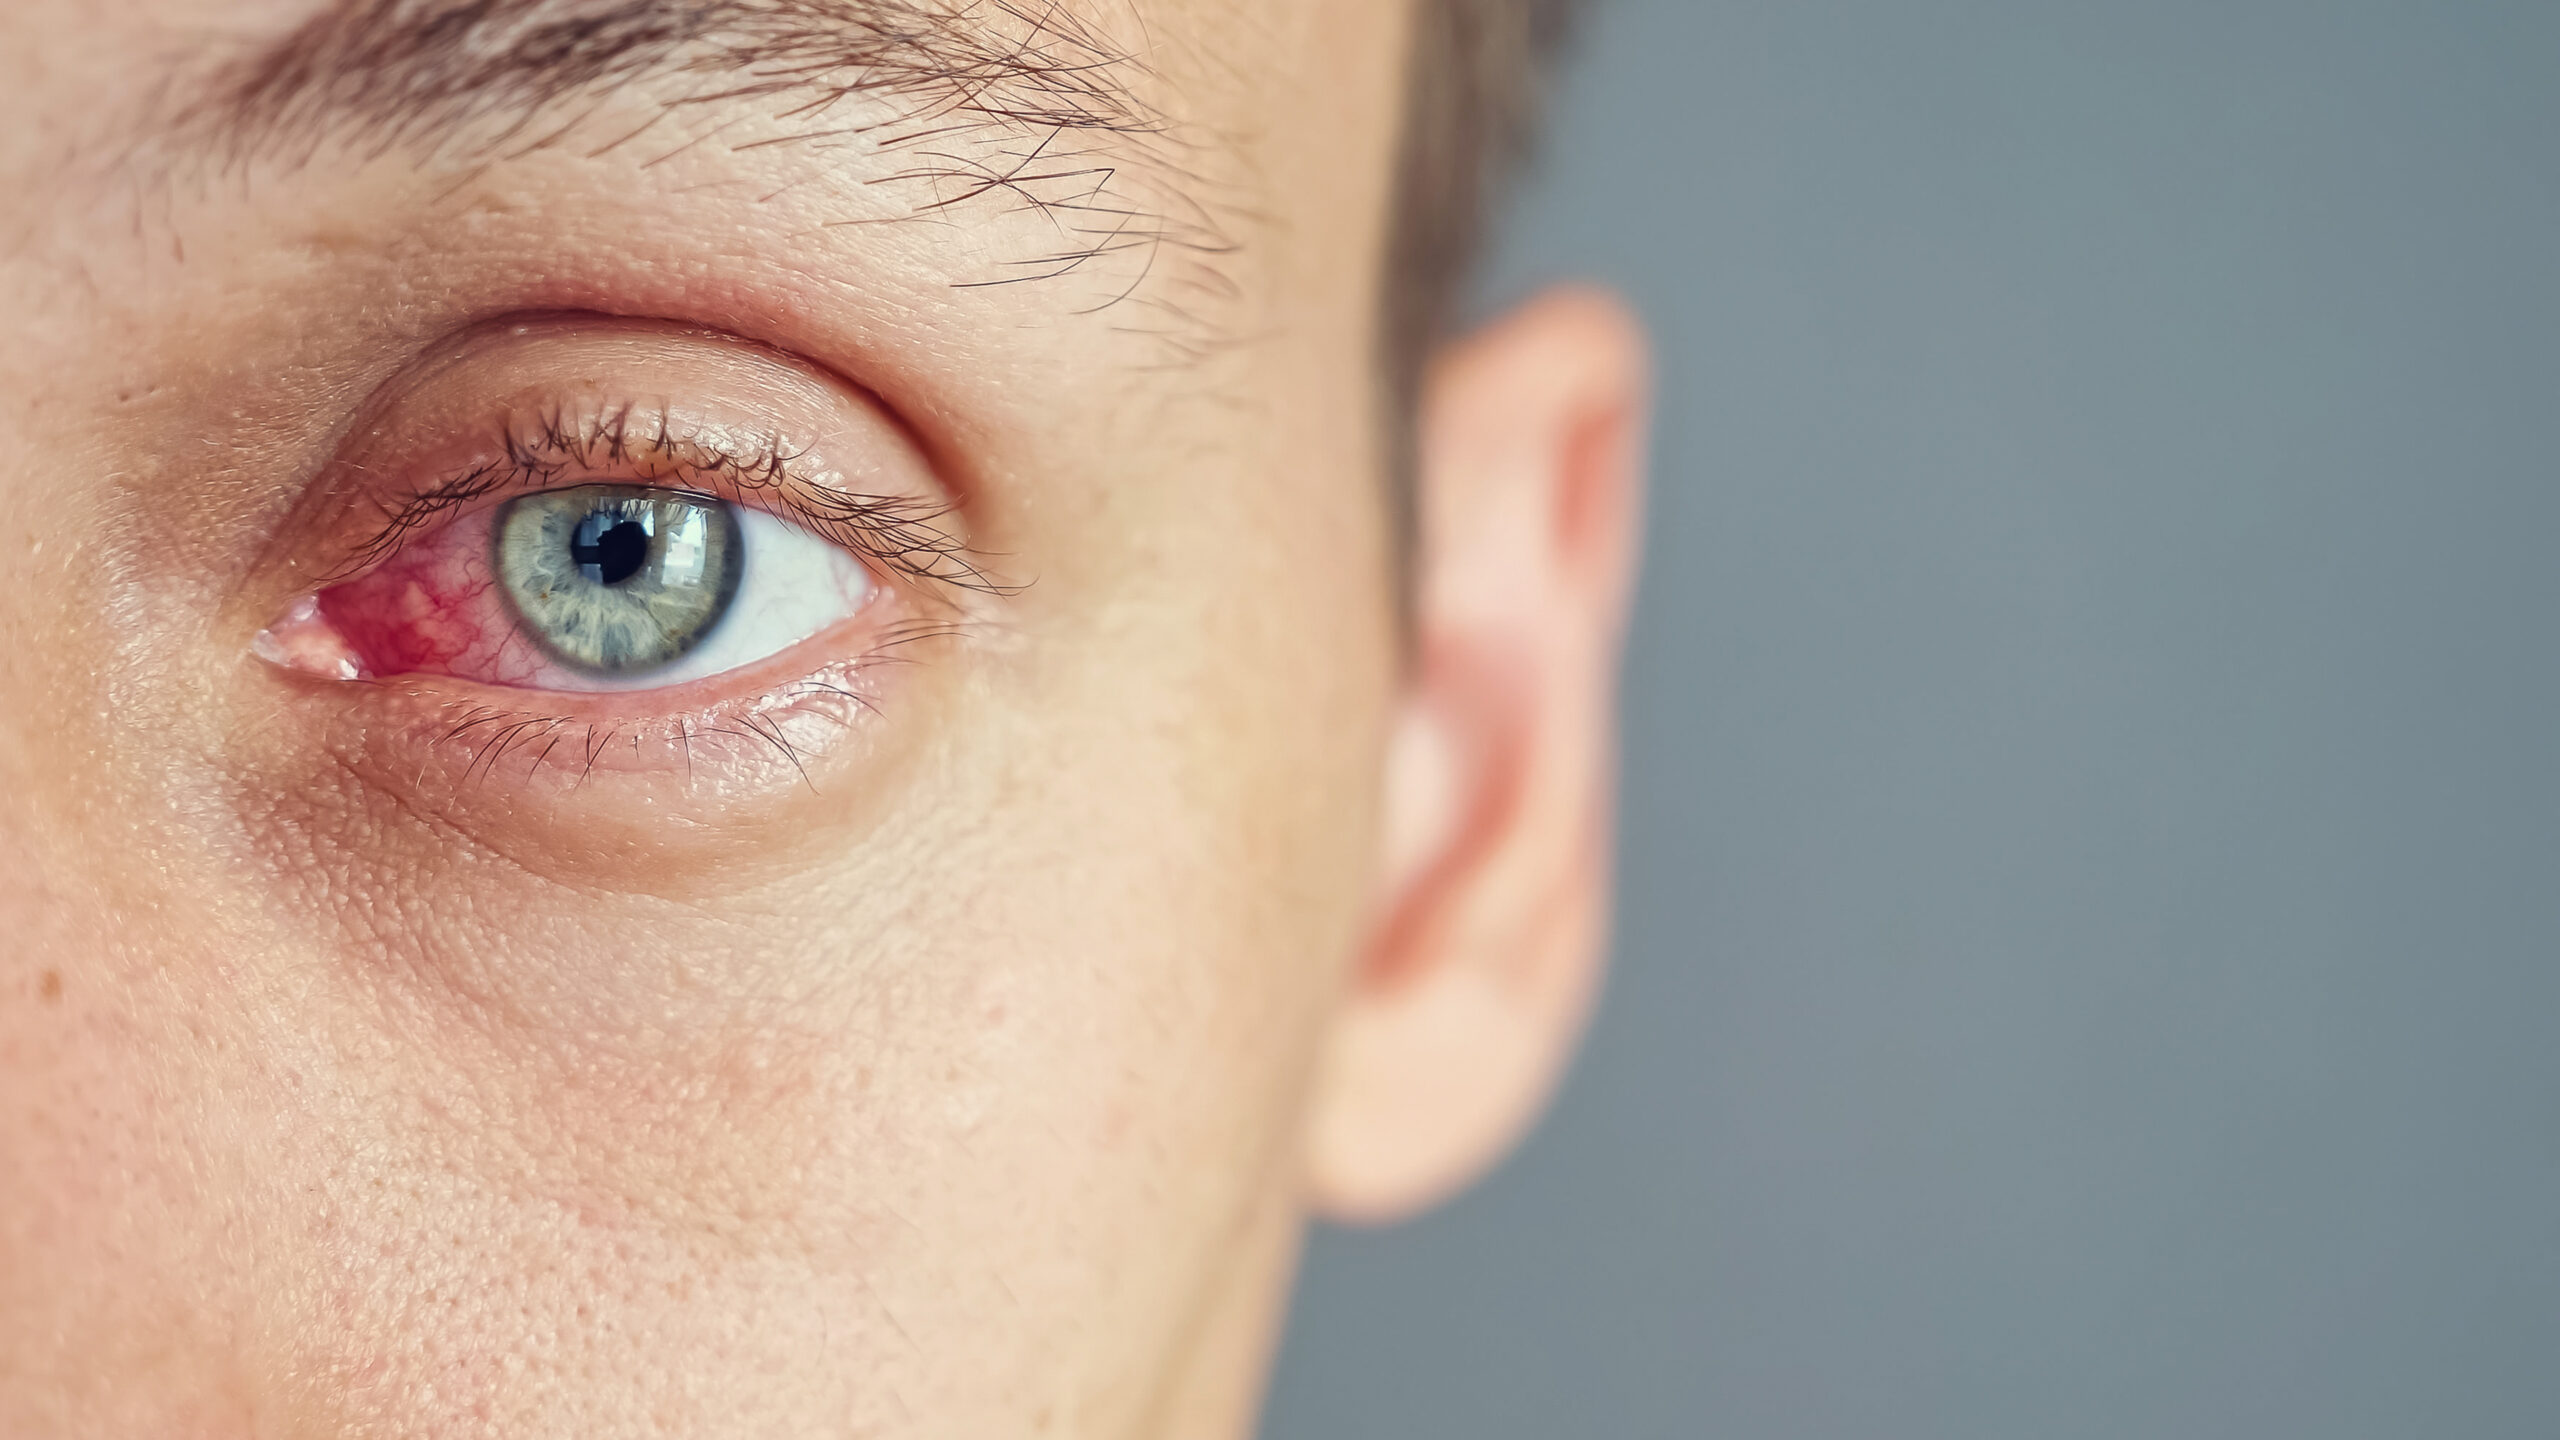 Close-up of the red eye of a man affected by an infection